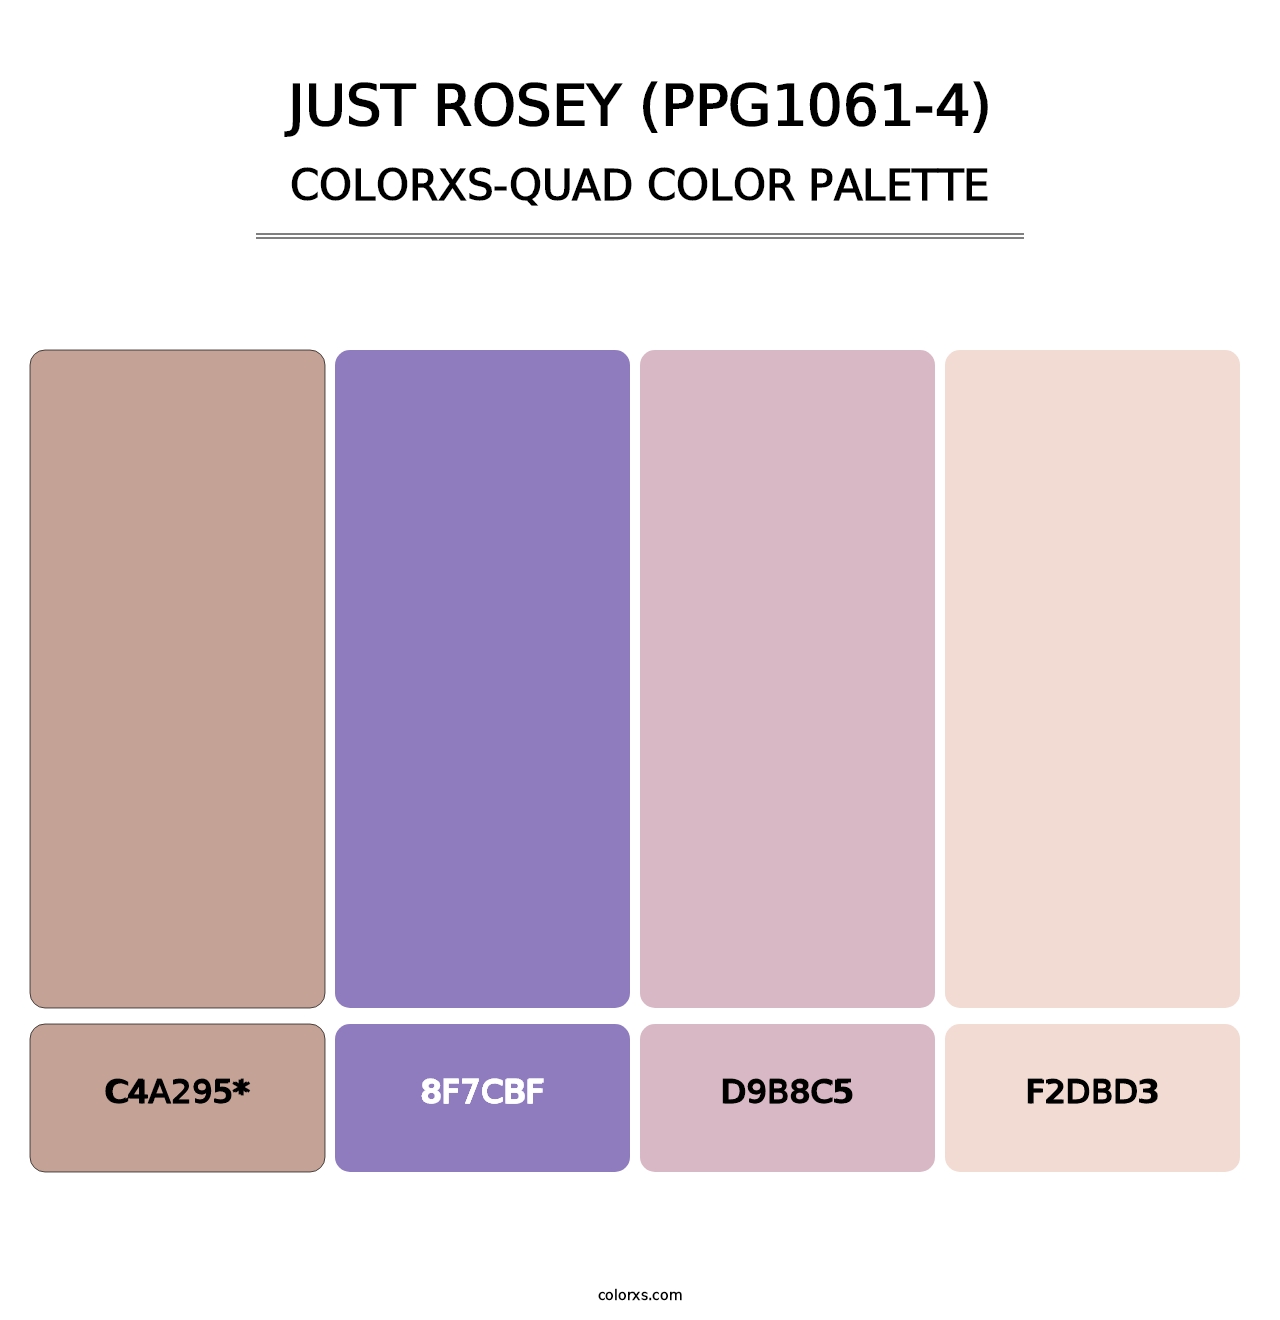 Just Rosey (PPG1061-4) - Colorxs Quad Palette